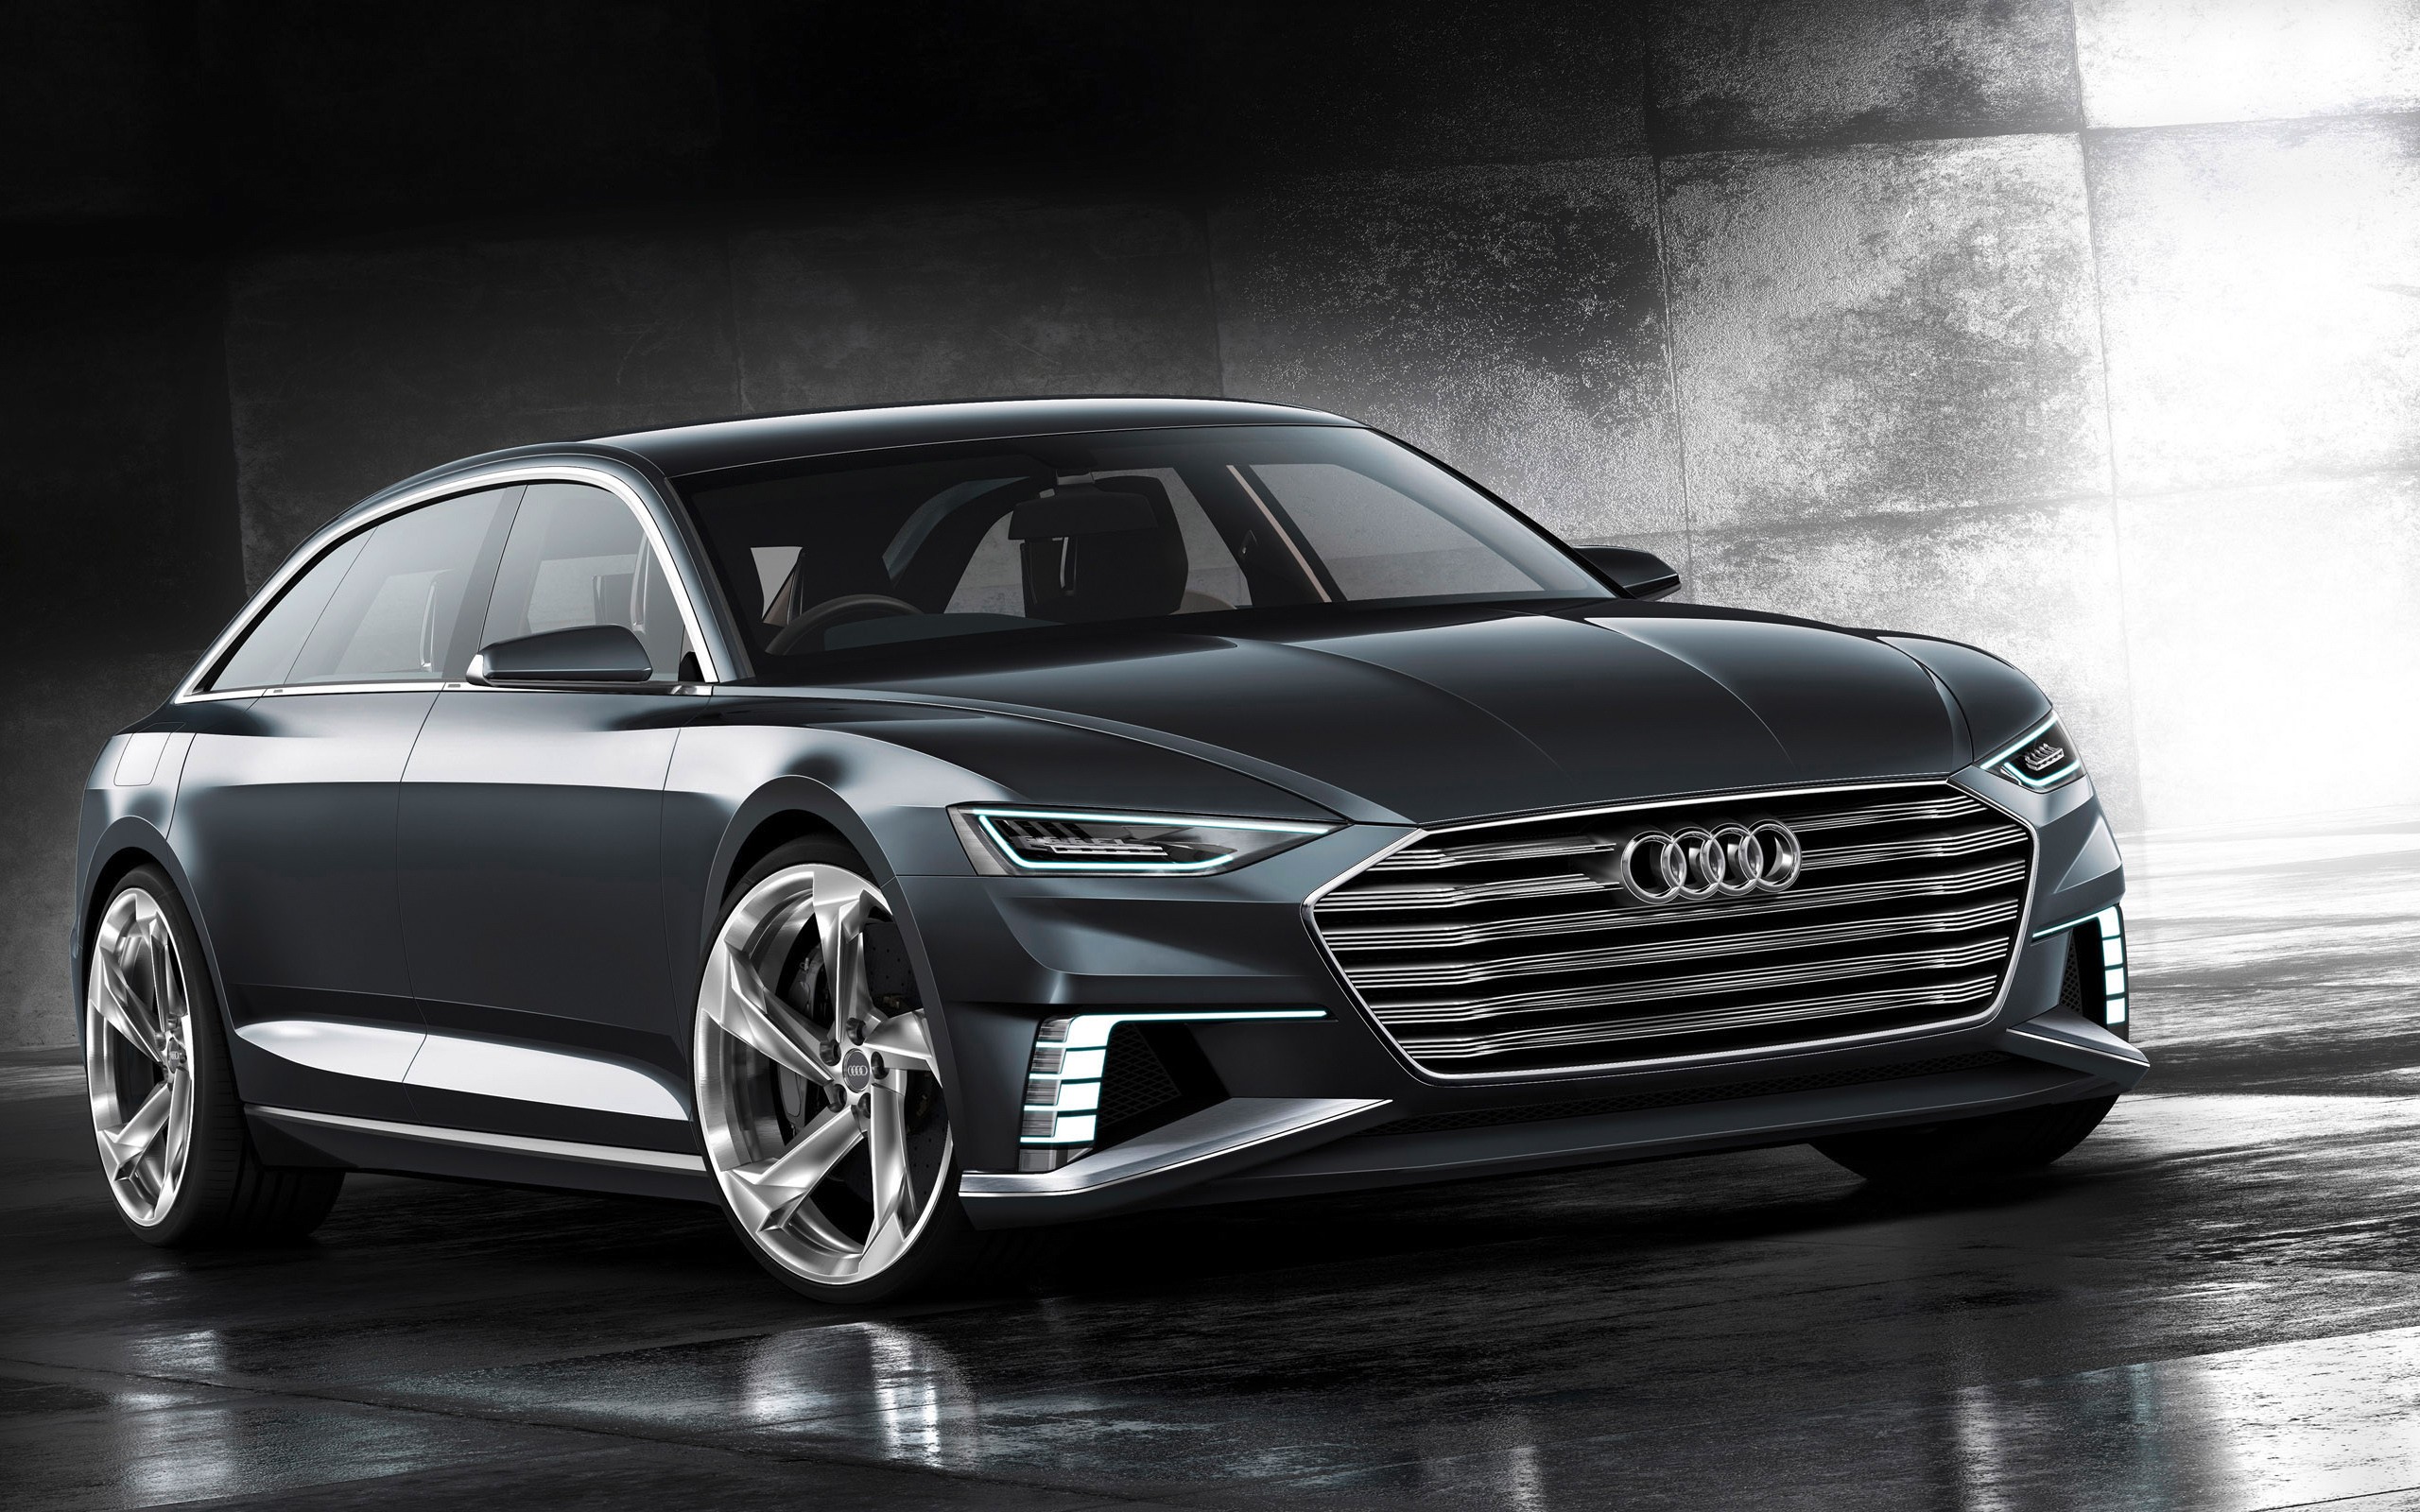 The Future Of Luxury: The Audi Prologue Avant Concept